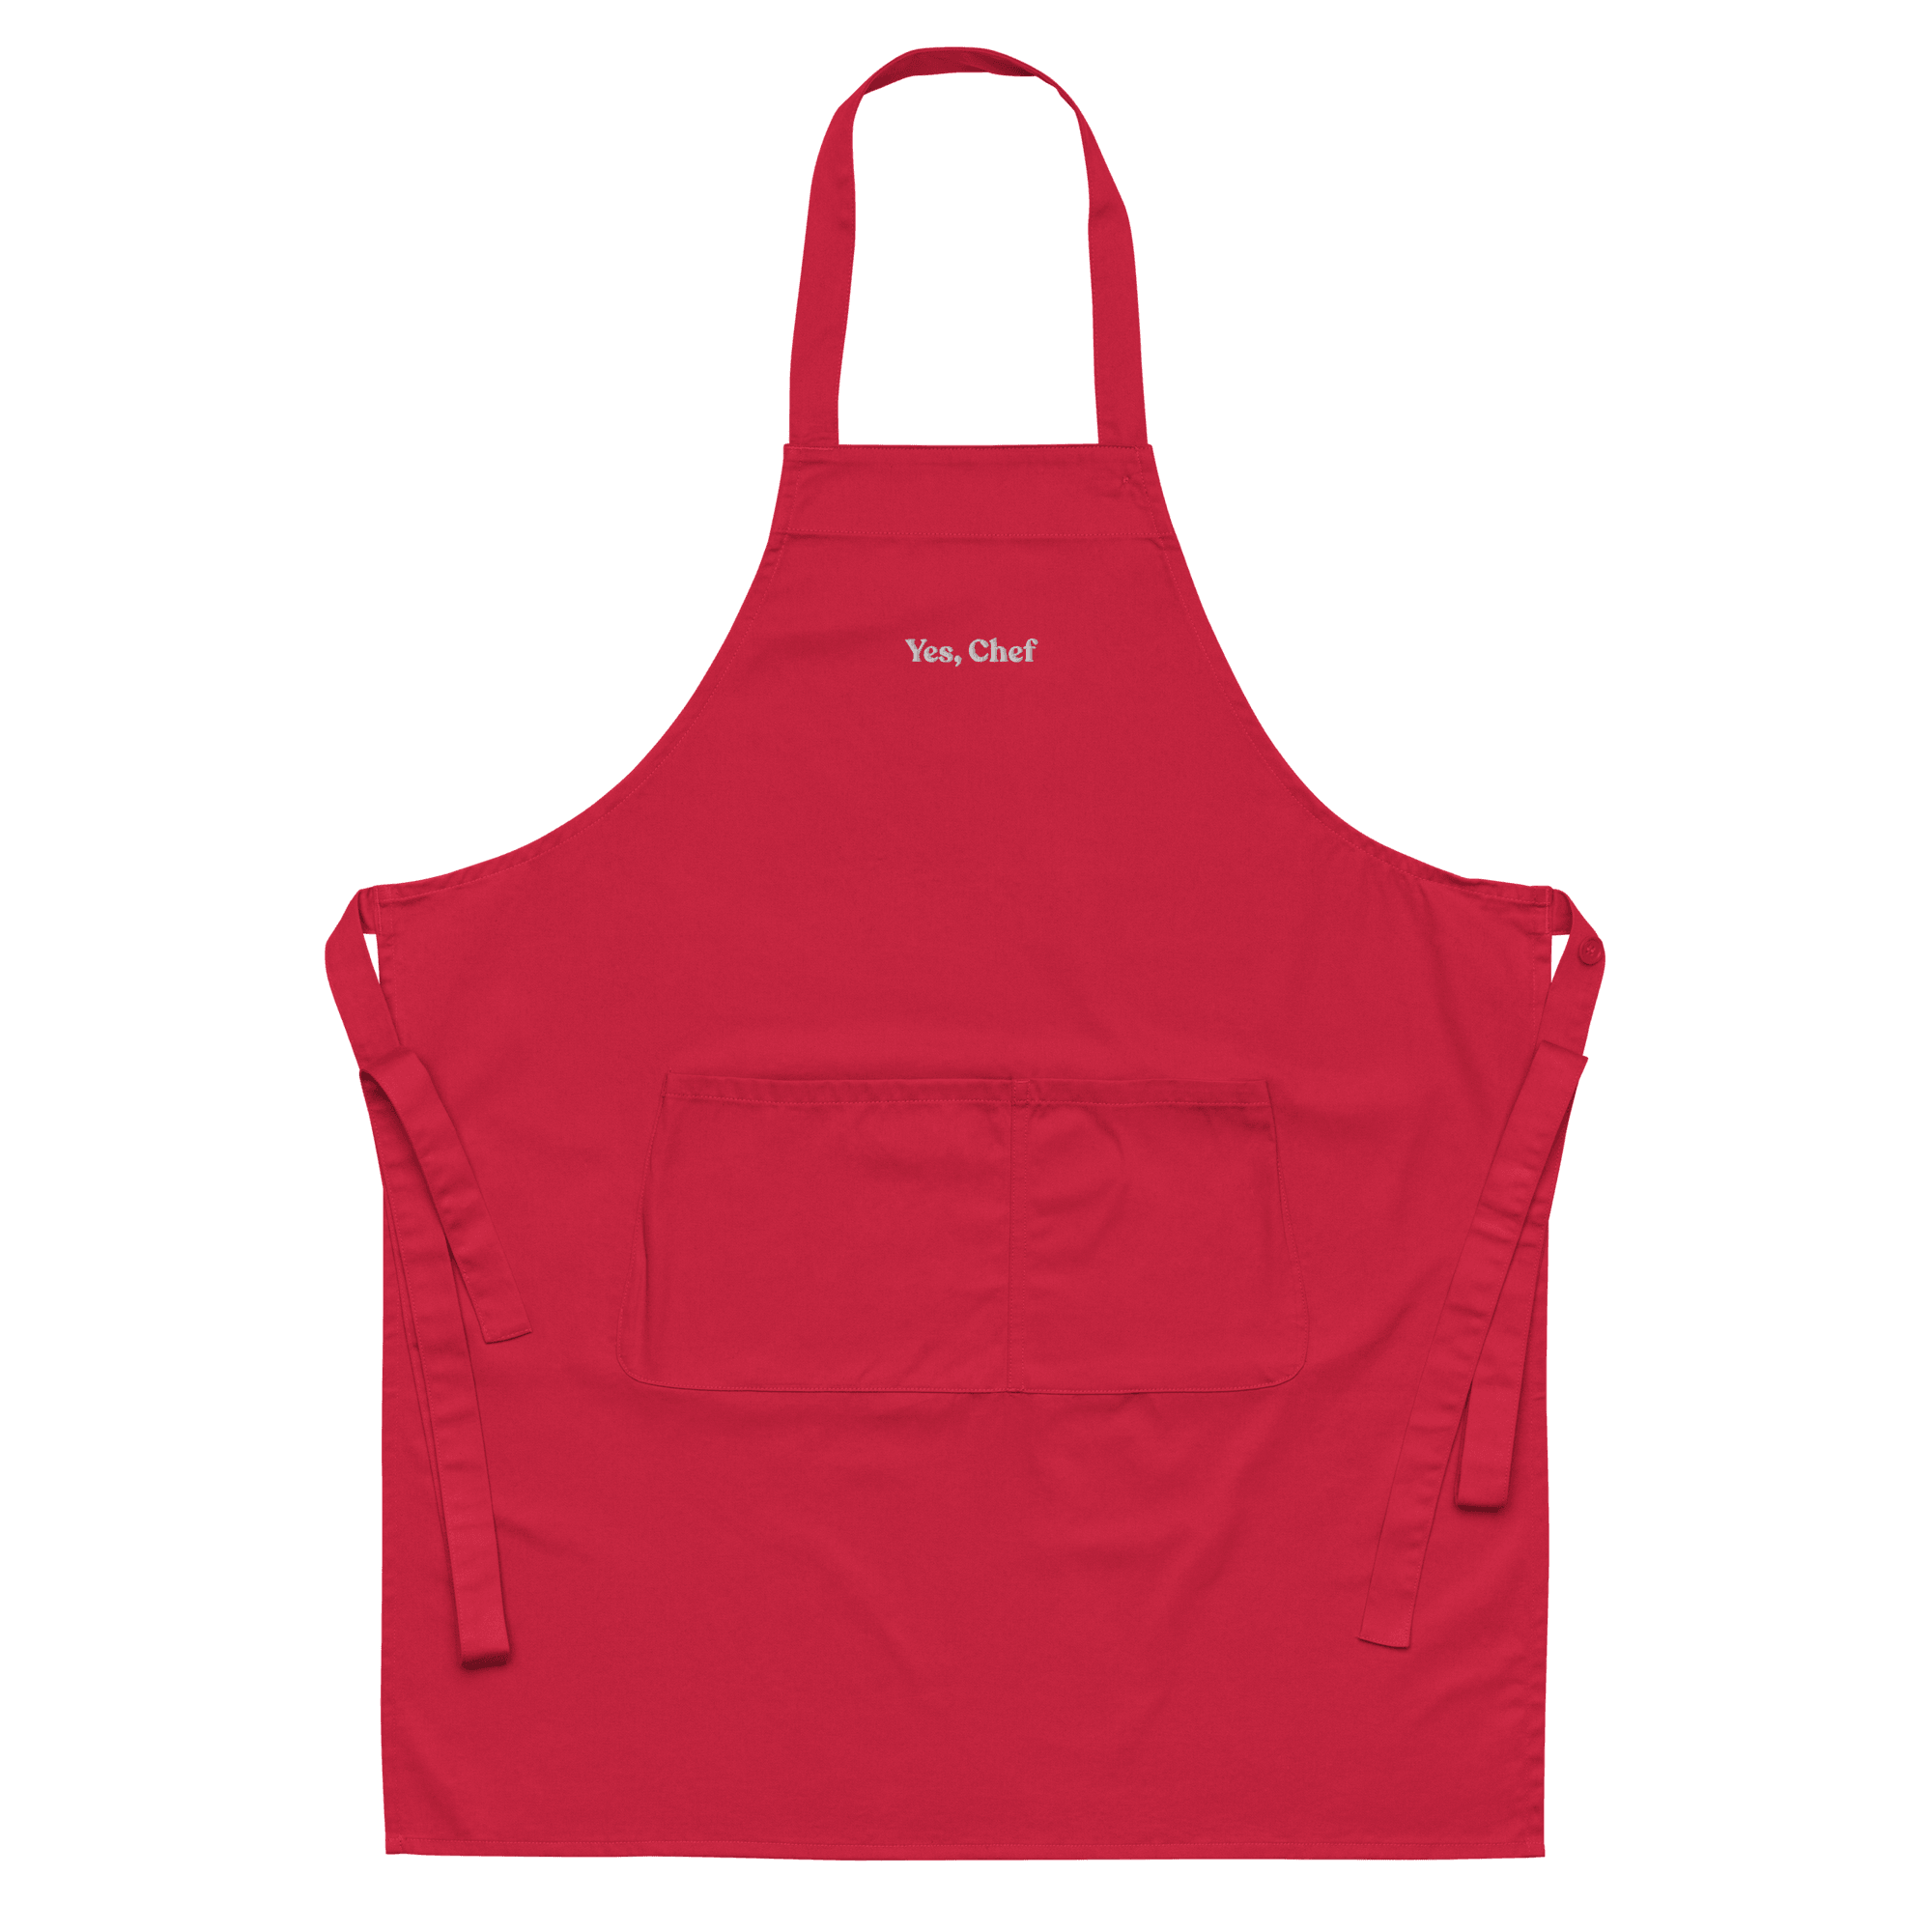 Yes, Chef Embroidered Organic Cotton Apron - Polychrome Goods 🍊